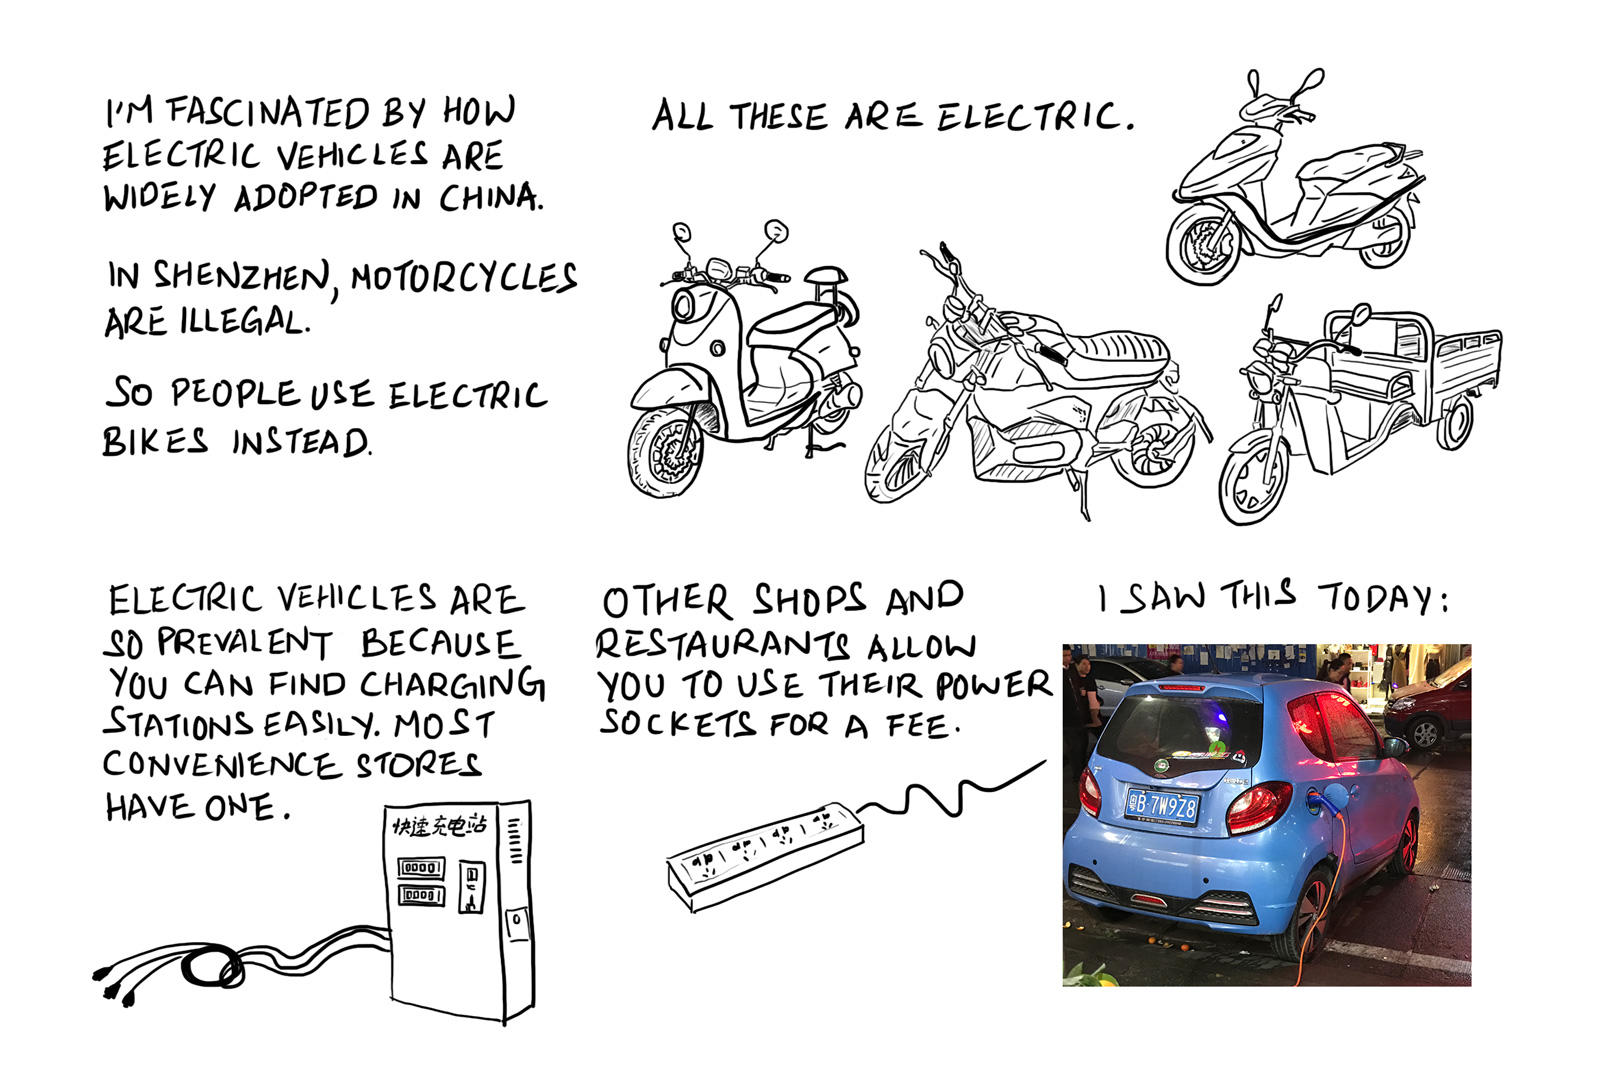 Electric vehicles in China